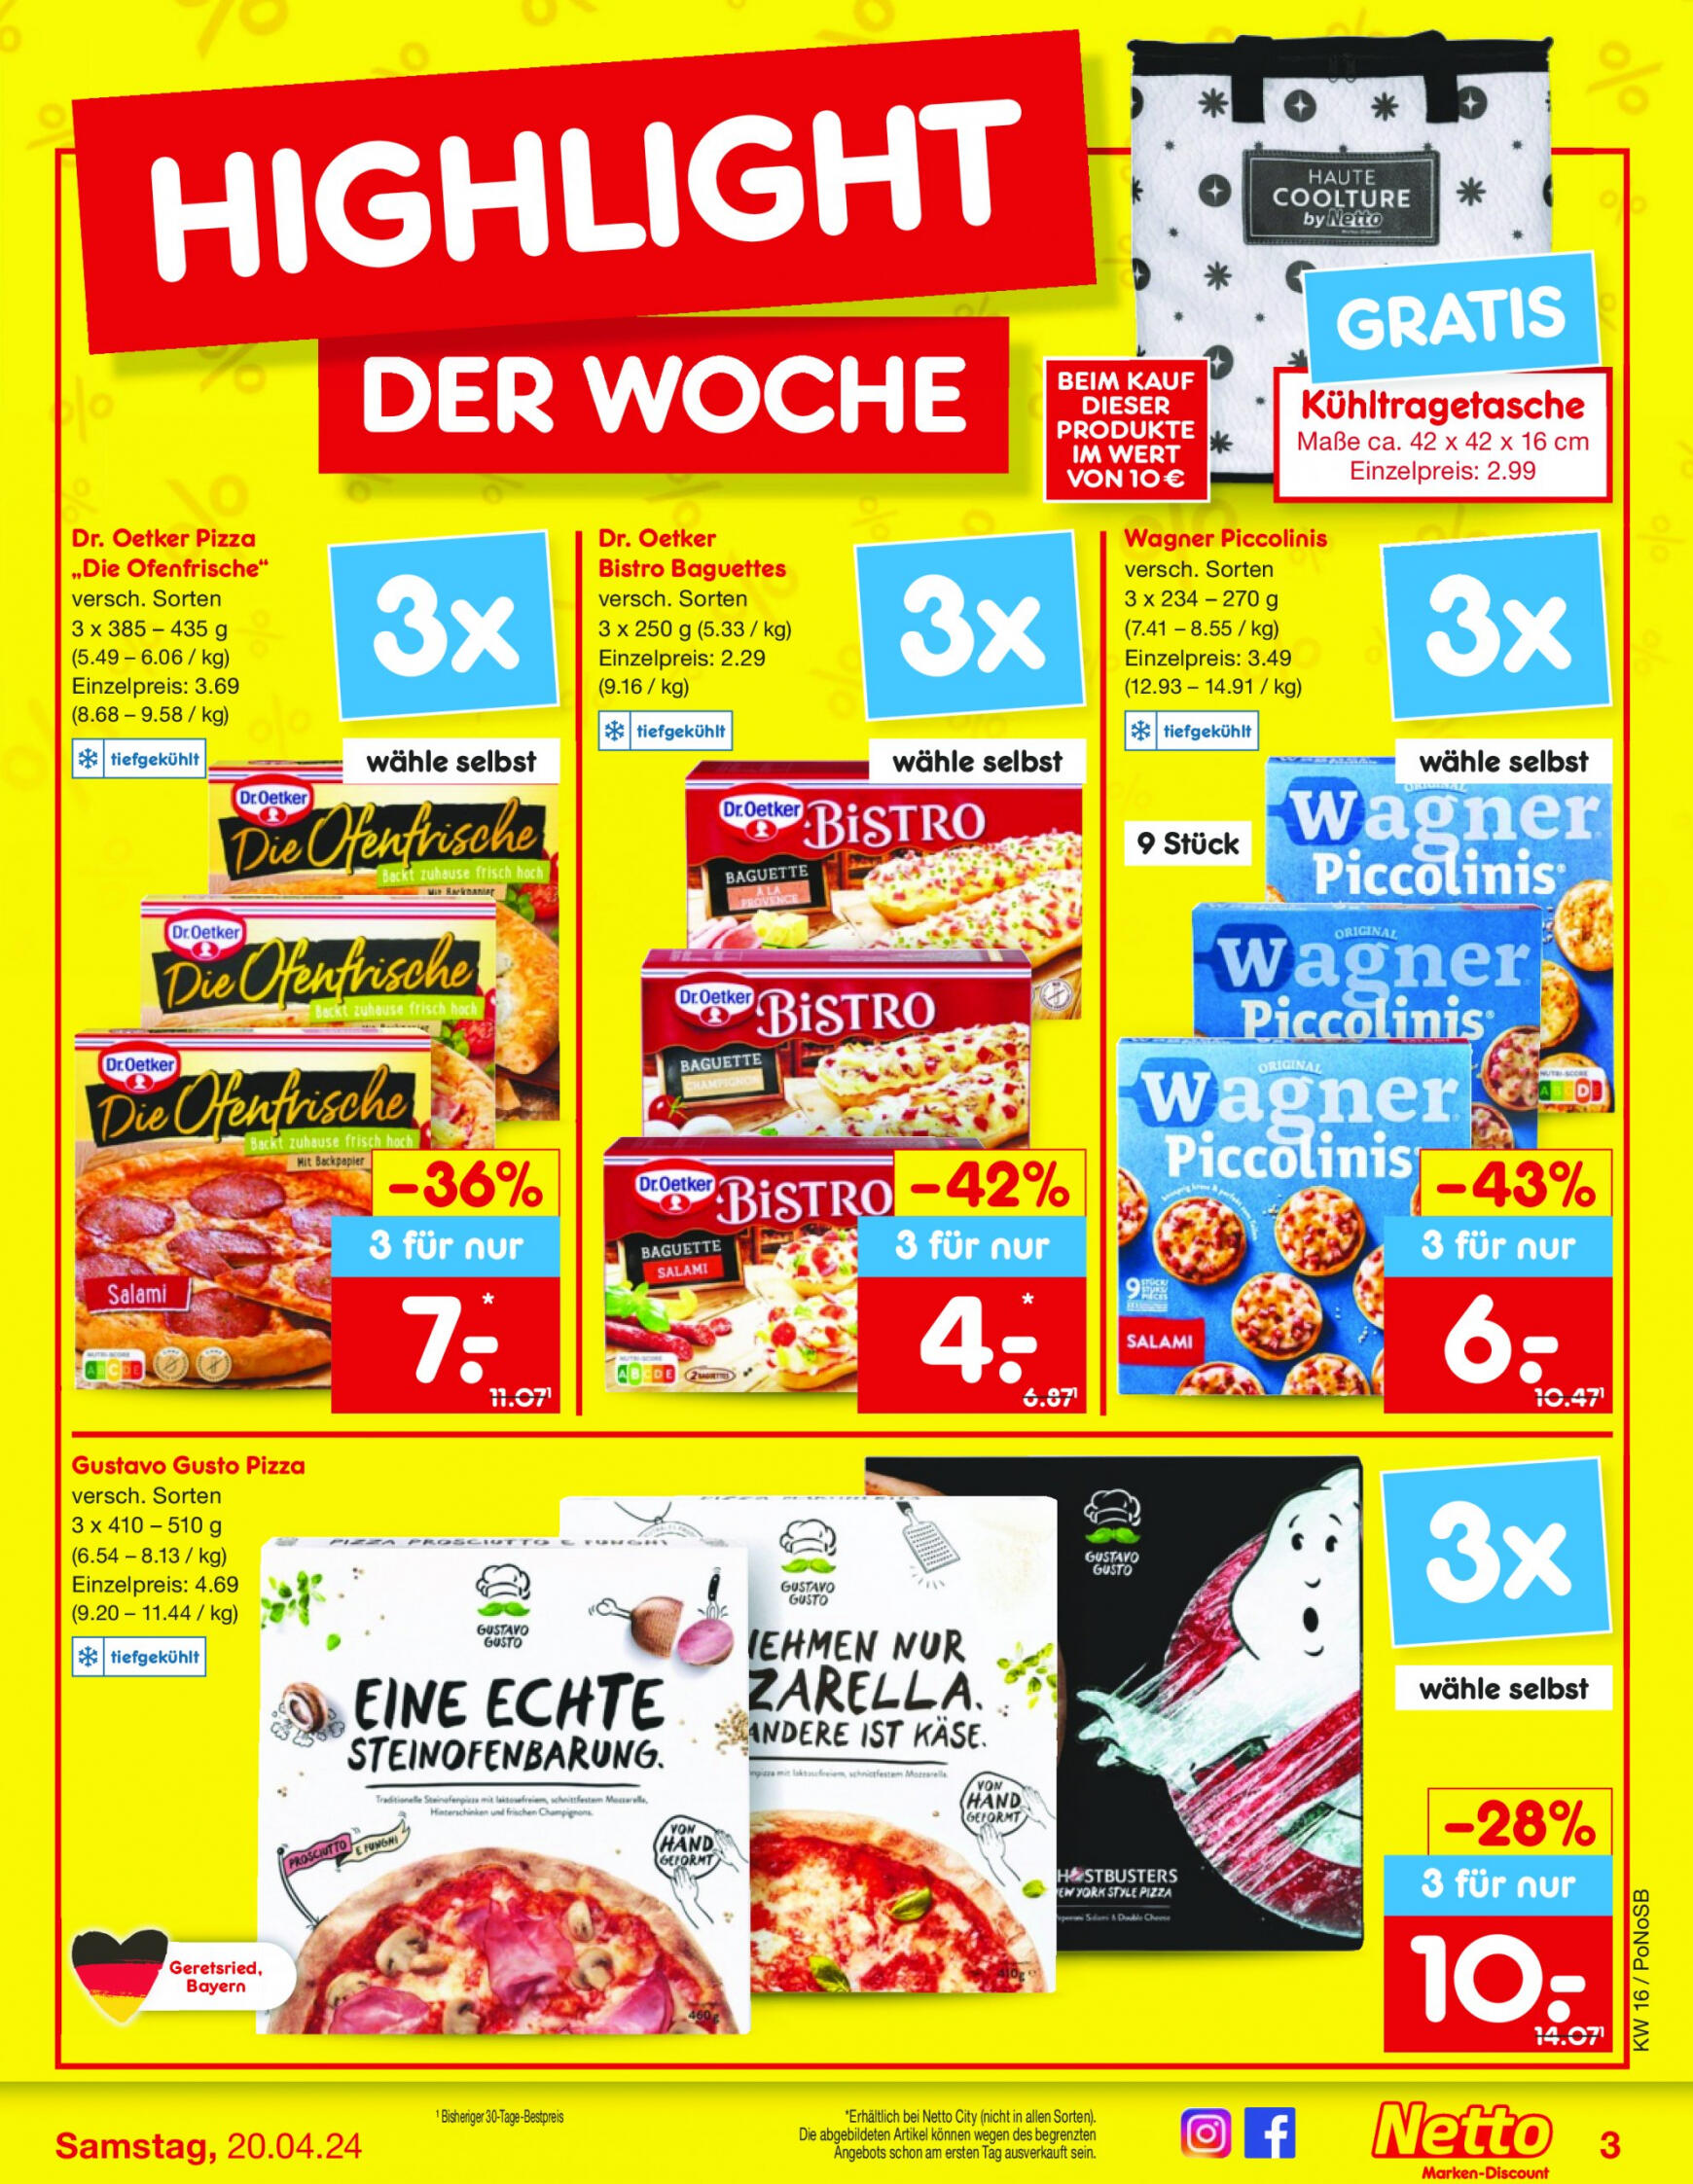 netto - Flyer Netto aktuell 15.04. - 20.04. - page: 3